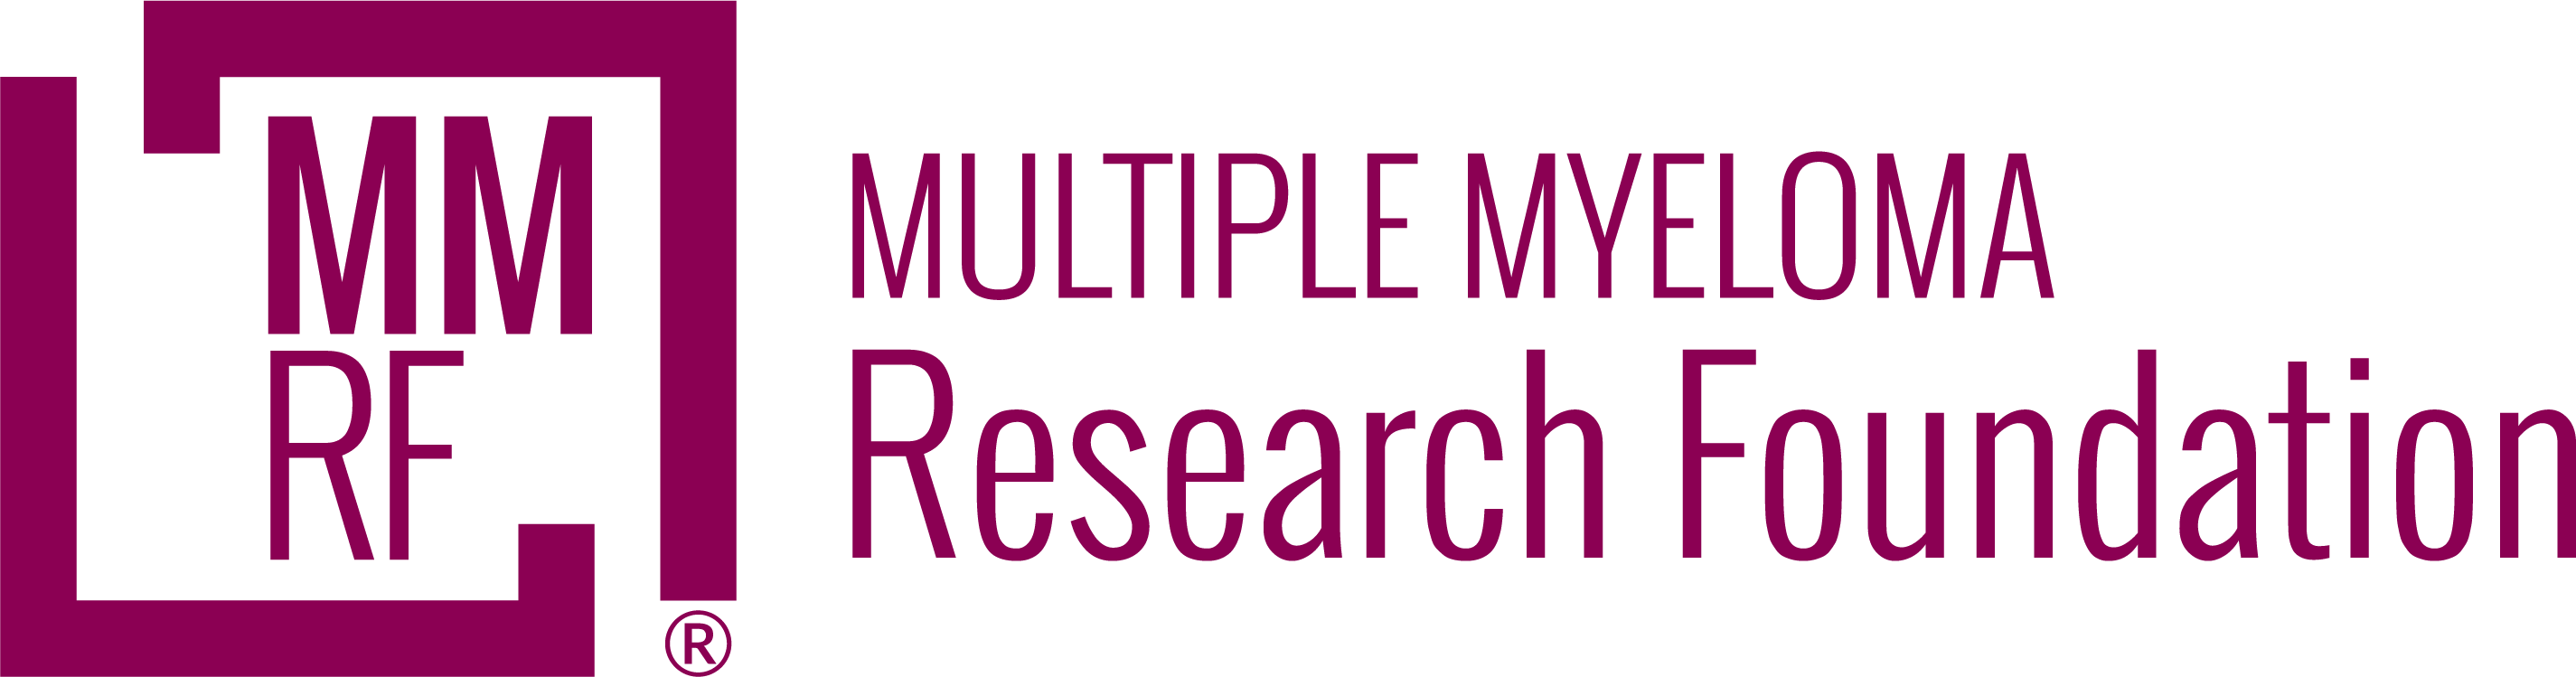 The Multiple Myeloma Research Foundation (MMRF)  Logo